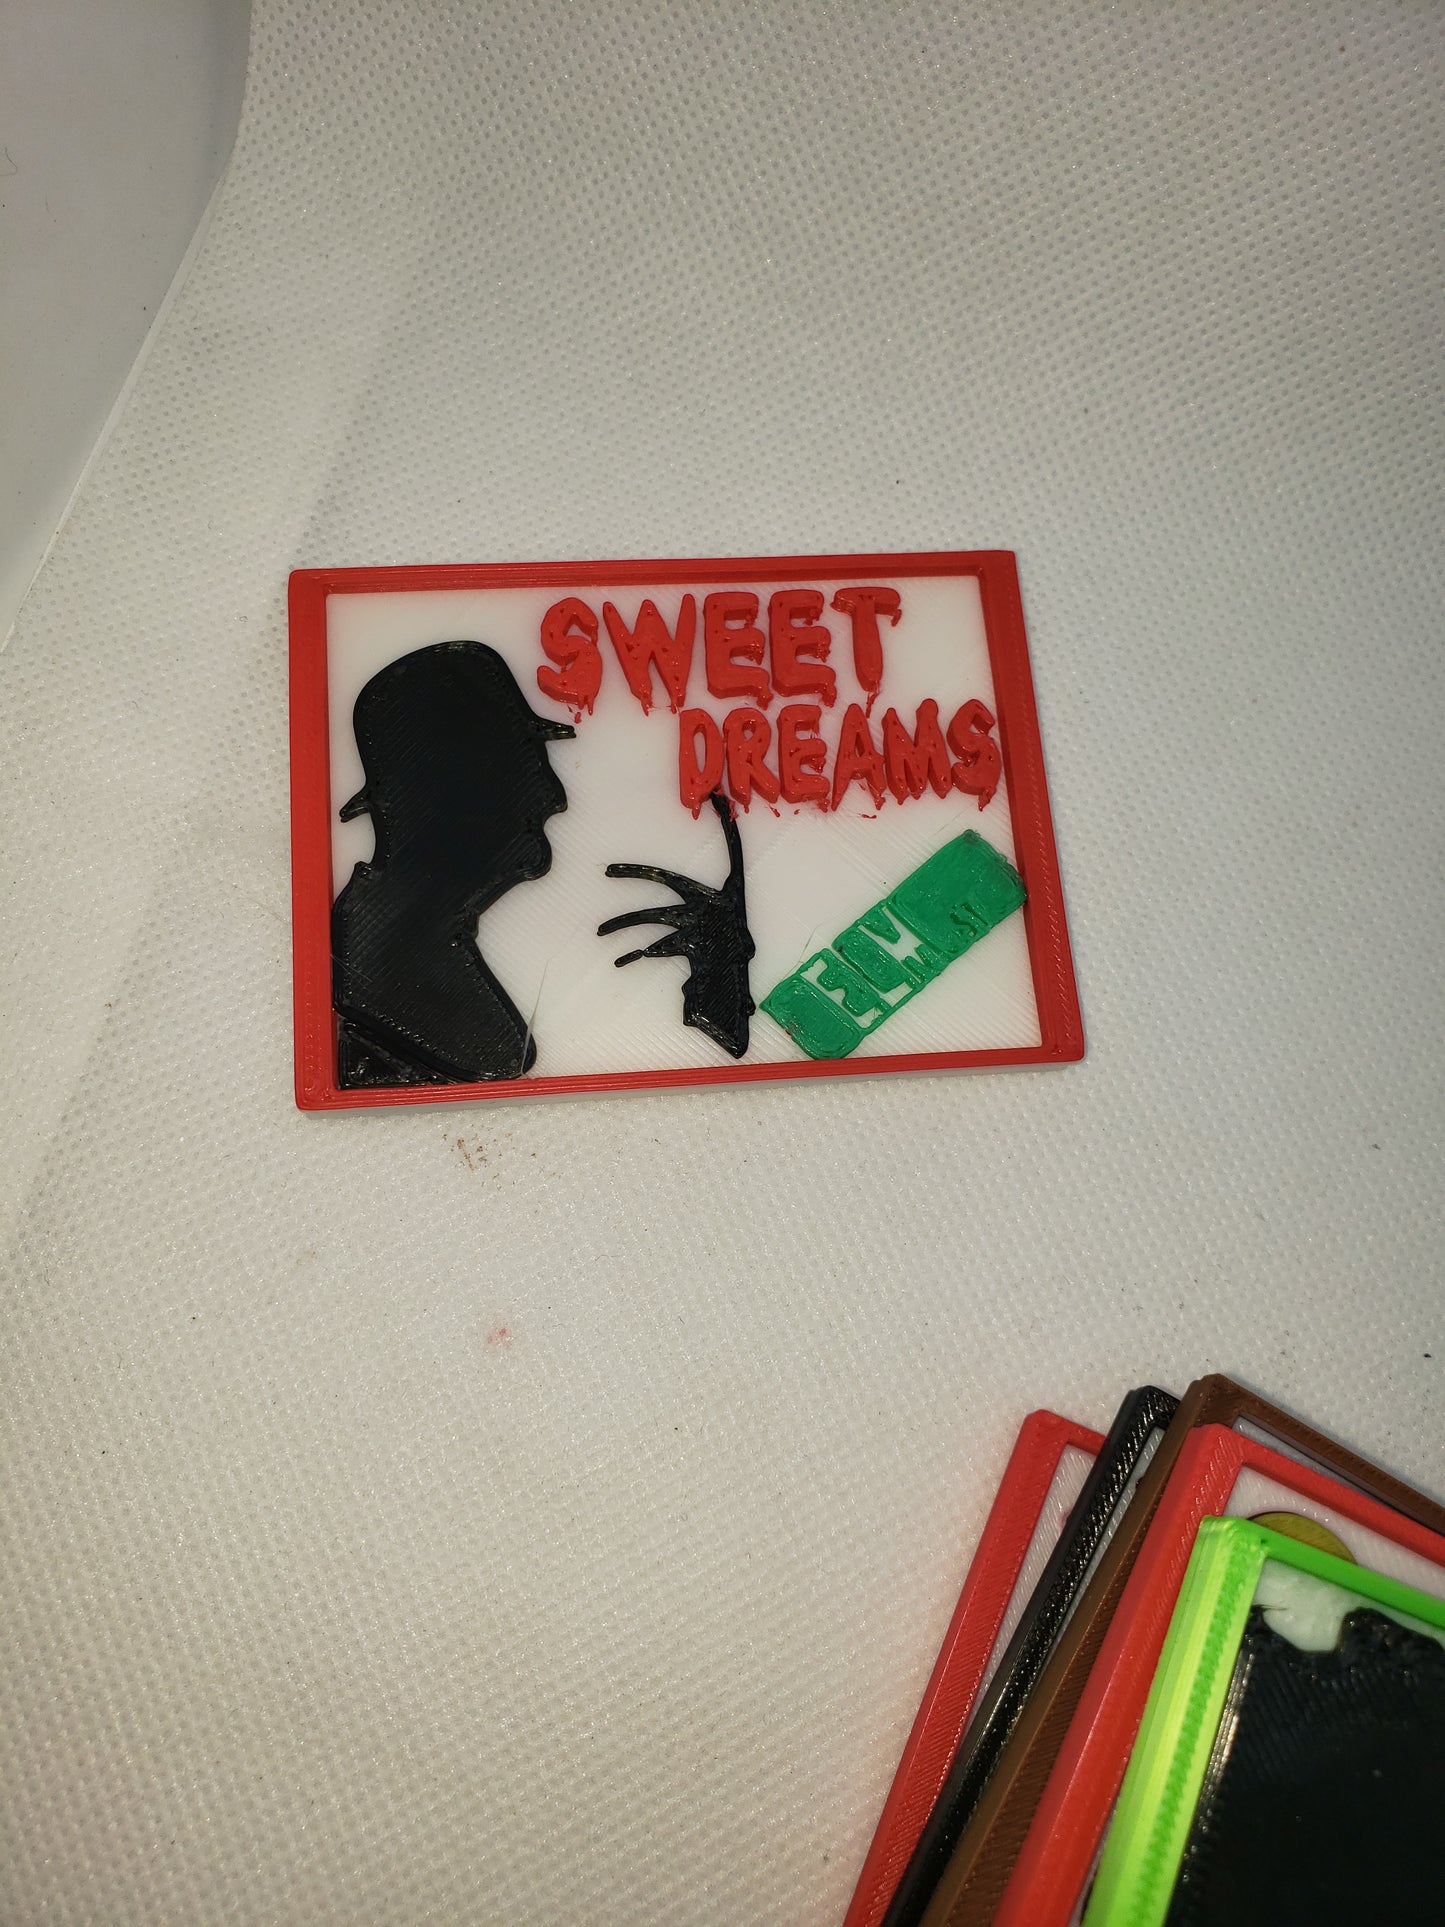 Horror Movie Magnets